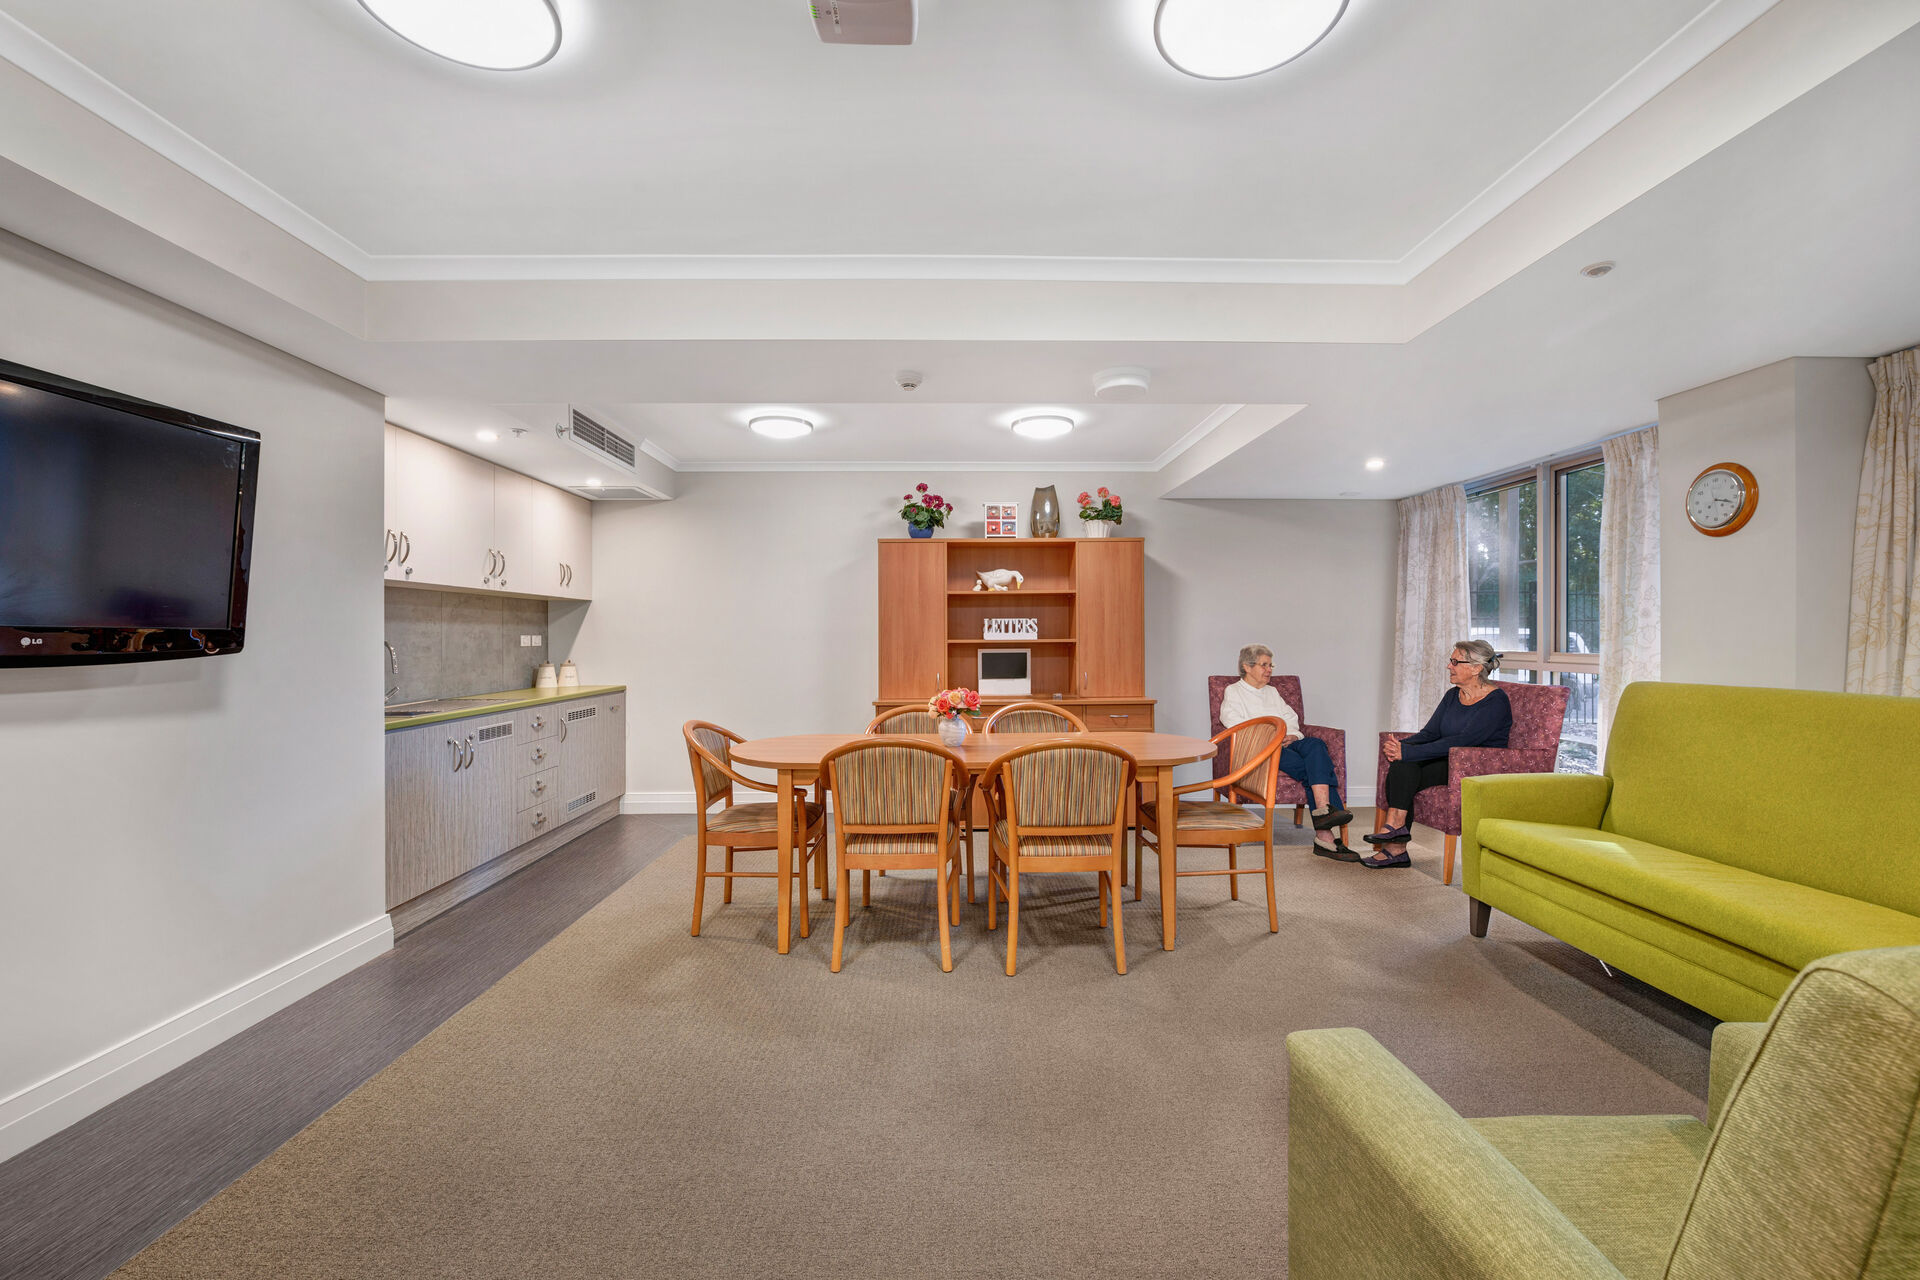 spacious lounge room with couches for aged care residents to socialise at baptistcare orana centre aged care home in point clare nsw central coast